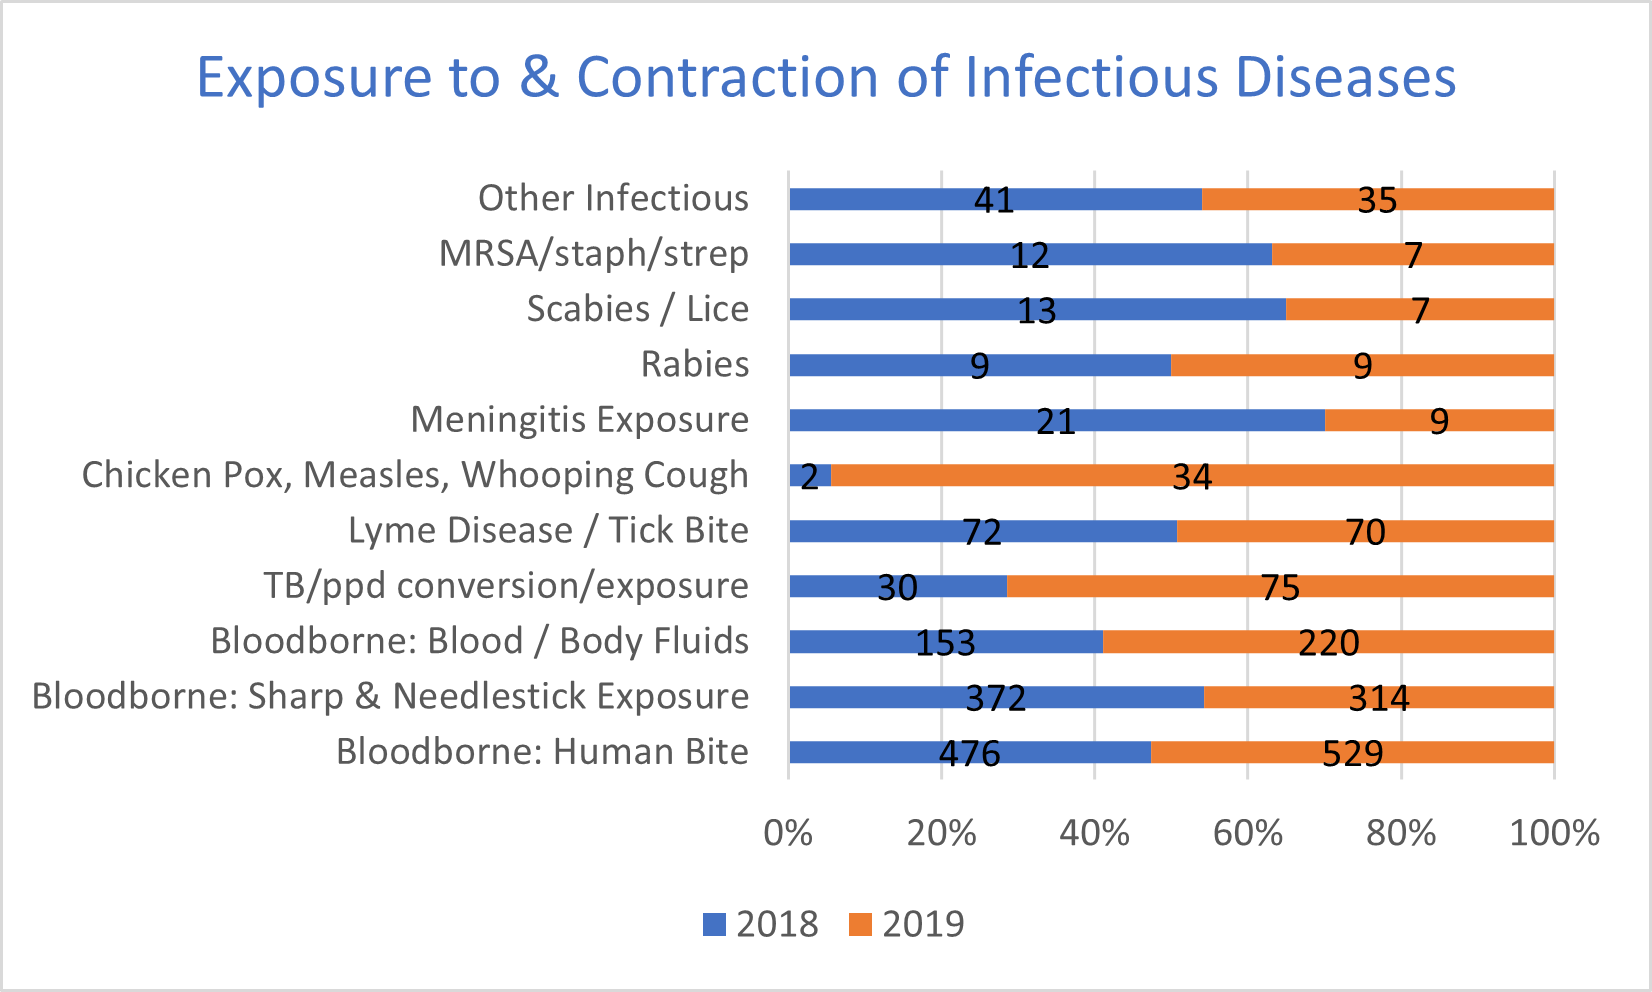 Exposure to & Contraction of Infectious Diseases